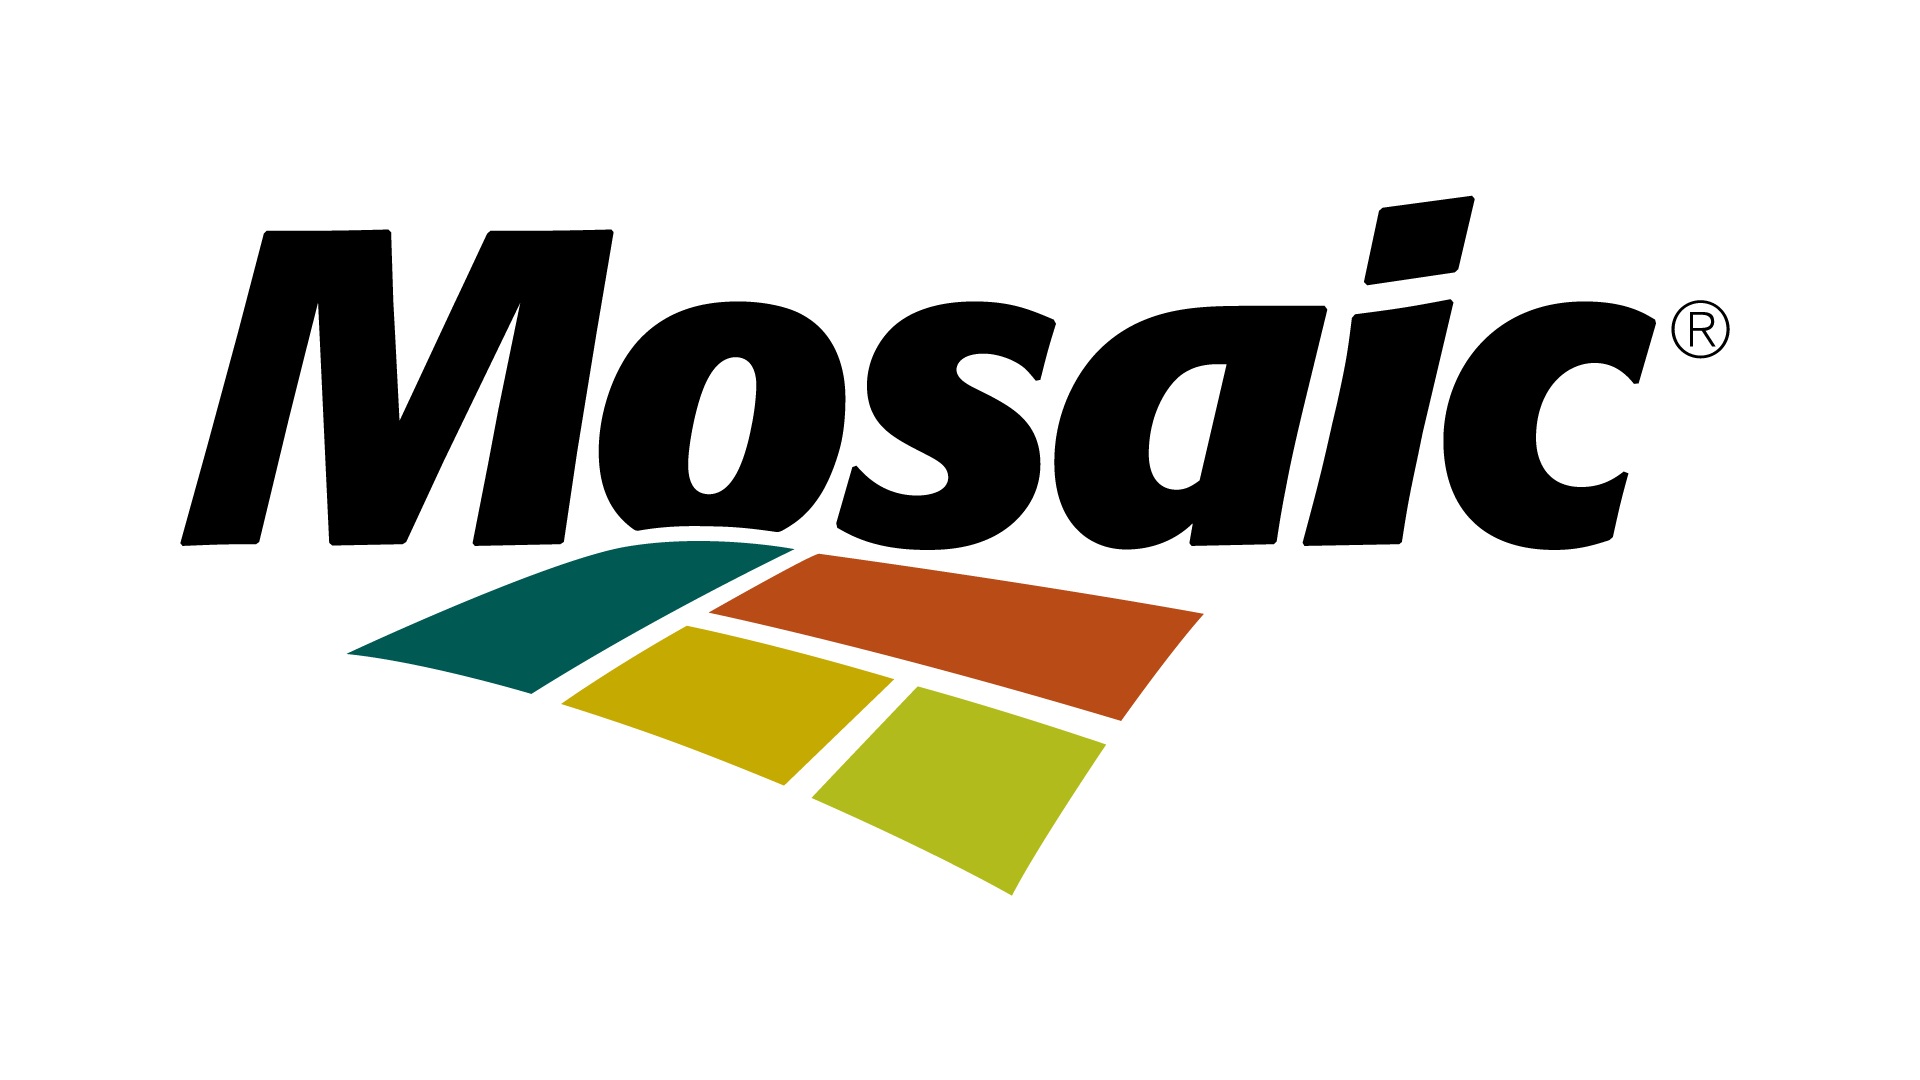 Company logo of Mosaic India Private Limited